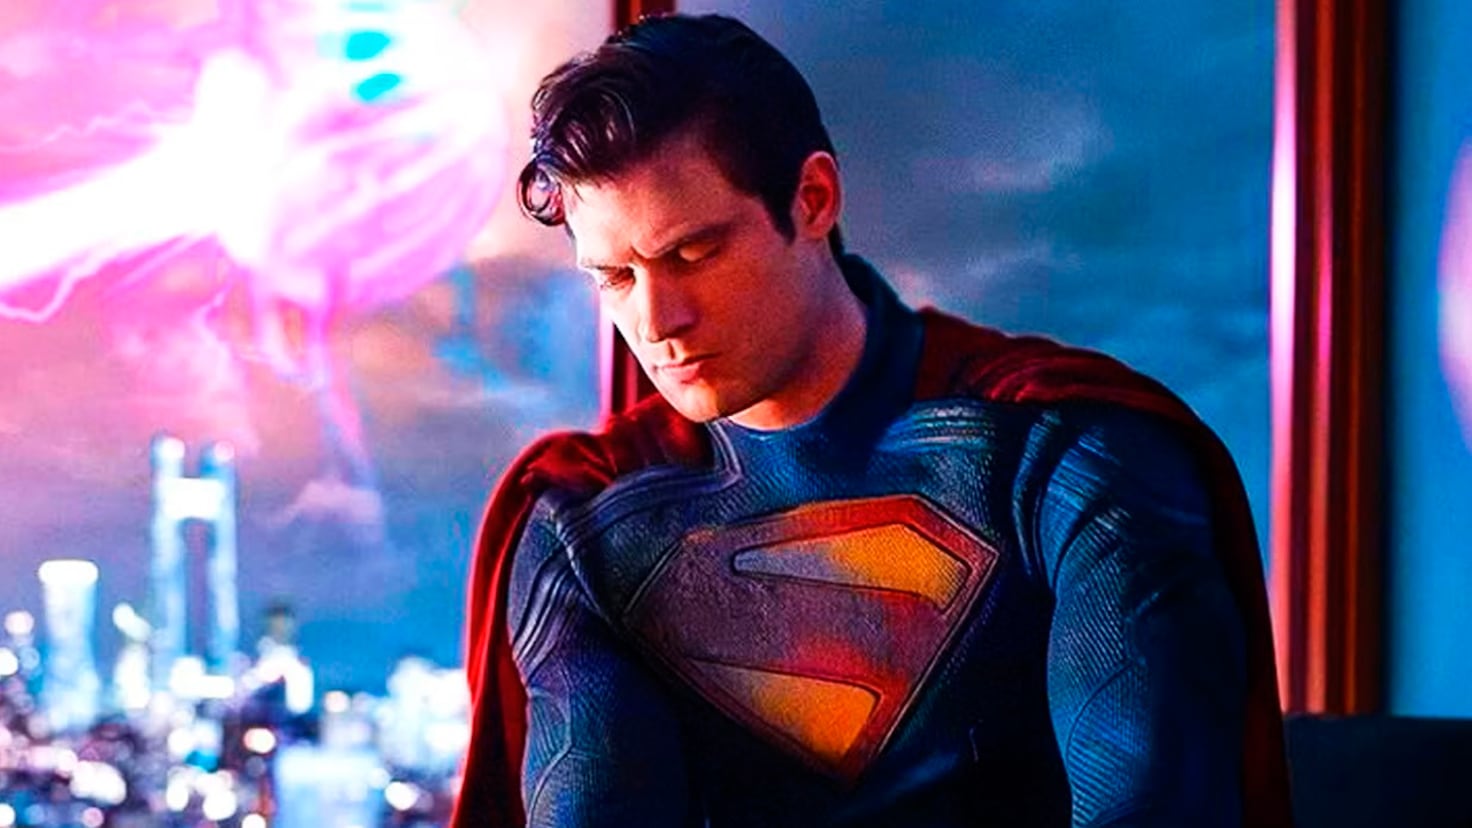 Tragedy on the set of Superman: a production employee is found dead